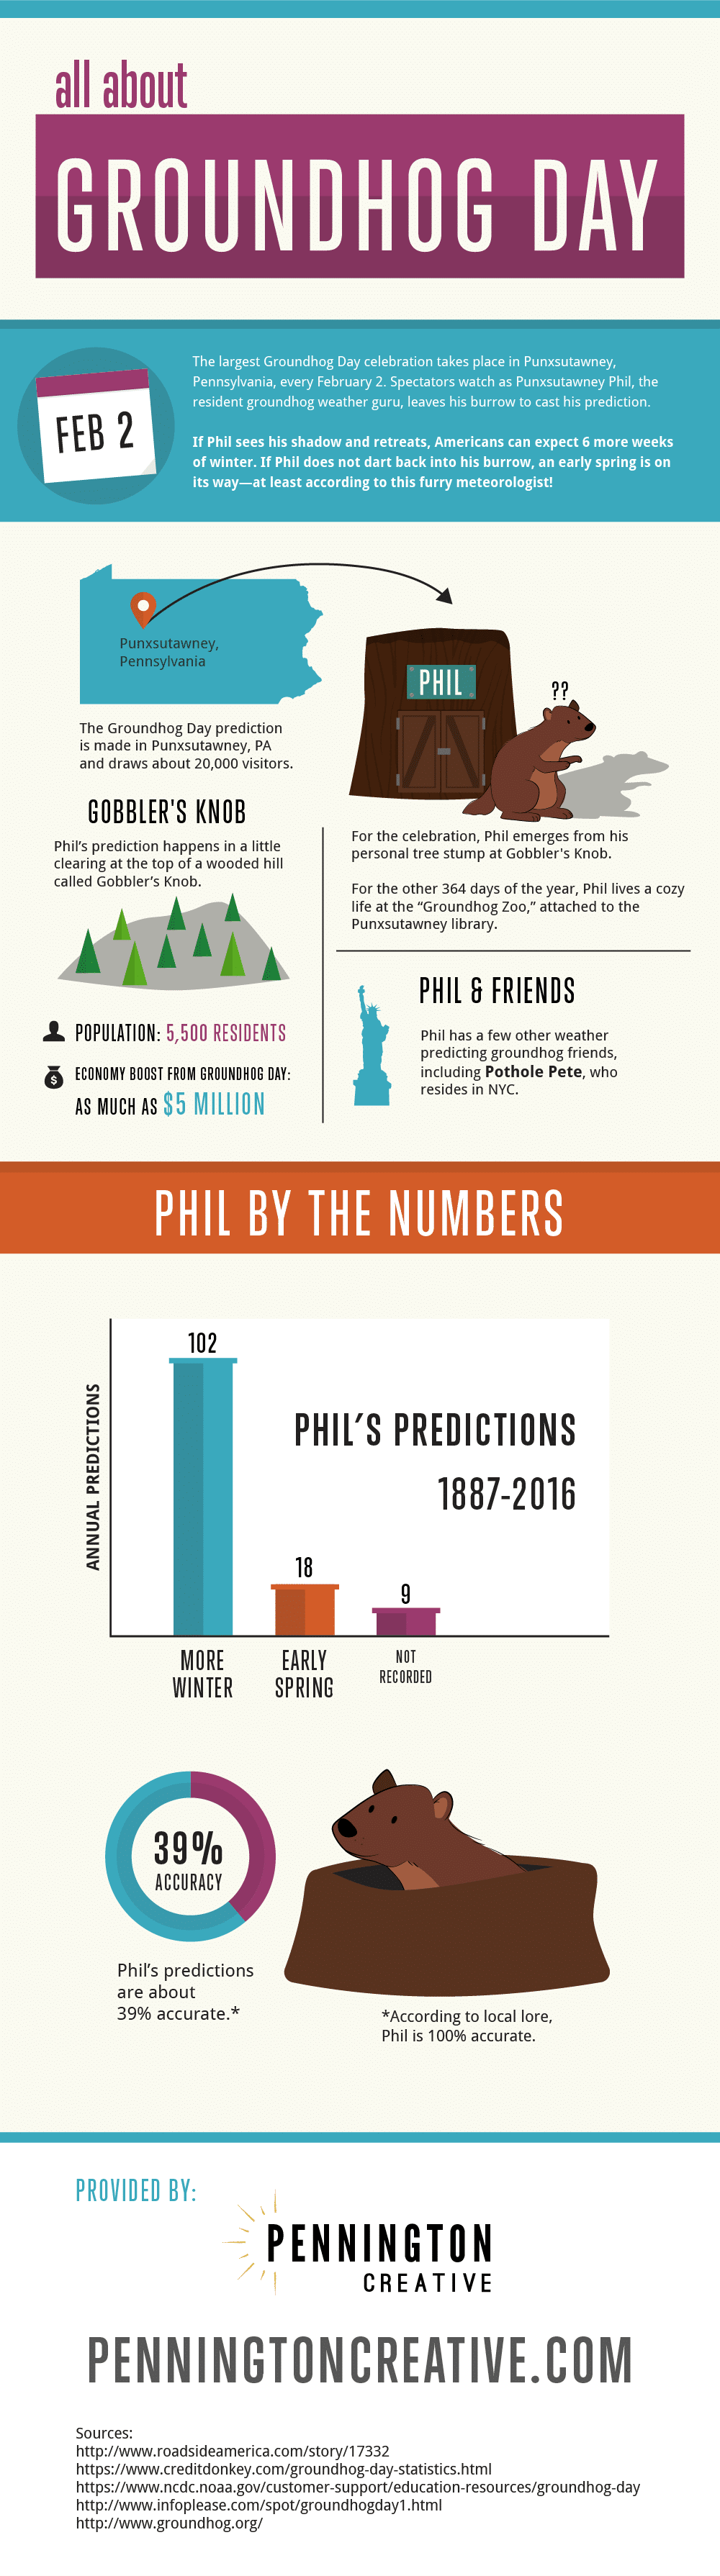 All About Groundhog Day Infographic